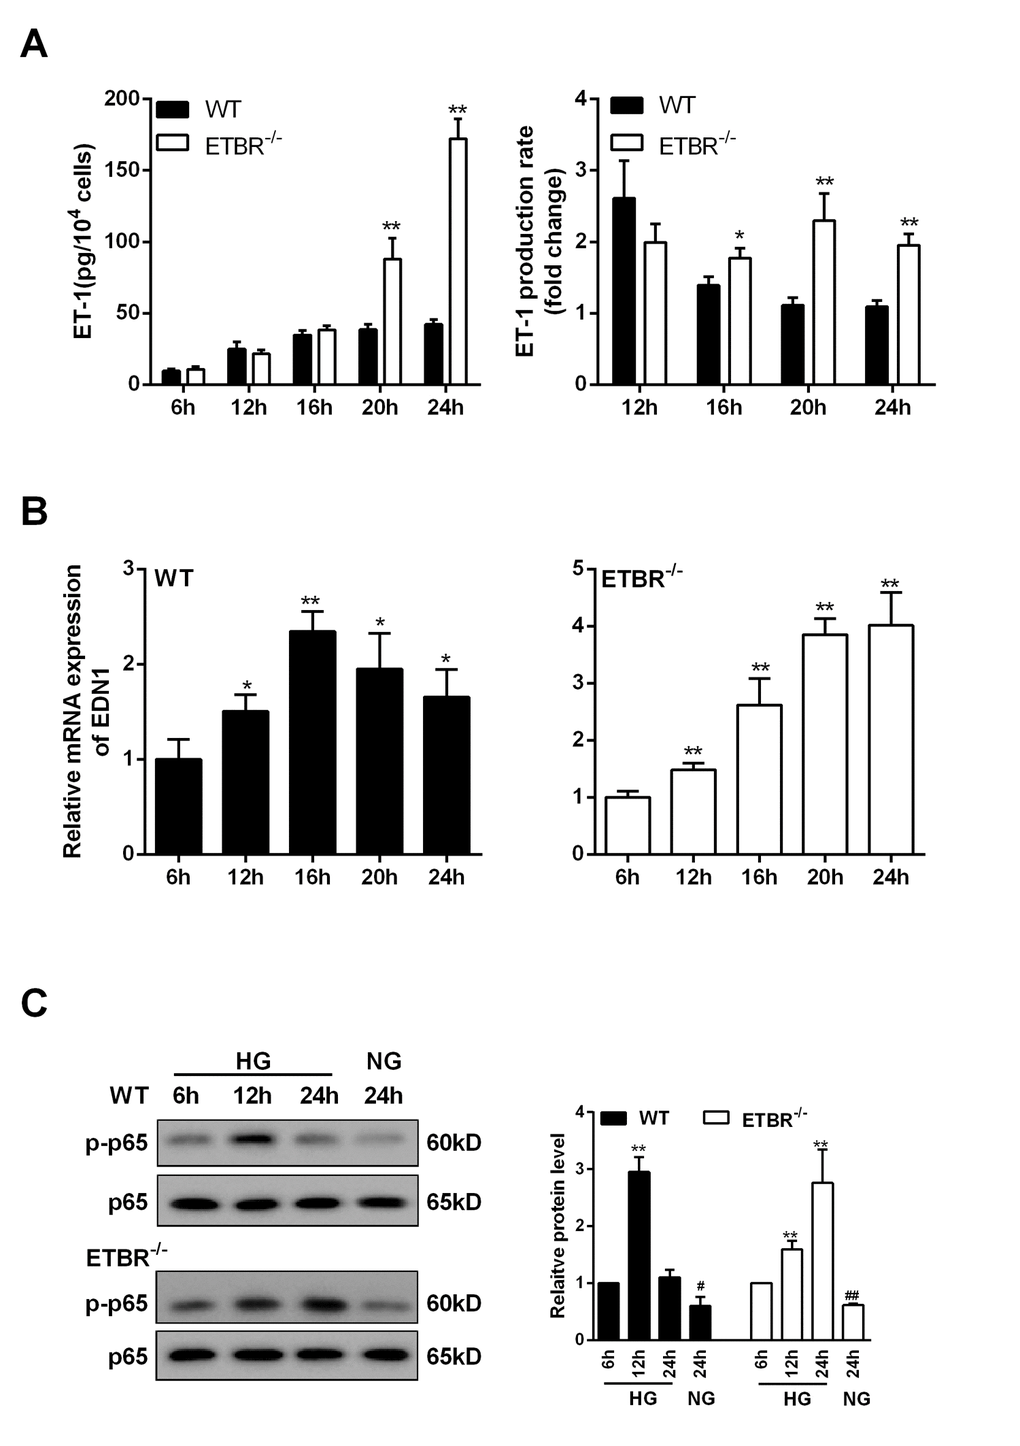 ET-1 was overexpressed in ETBR knockout GENs and was regulated by NF-kapapB pathway. GENs was cultured in HG medium, and the supernatant and GENs were collected at 6 h, 12 h, 16 h, 20 h, 24 h after cultivation. (A) Under the HG condition, ET-1 expression (in the supernatant)in WT and ETBR knockout GENs groups was detected at 6 h, 12 h, 16 h, 20 h, 24 hGENGEN . **pB) mRNA expressions of EDN1 in WT GENs and ETBR-/- GENs groups were detected at 6 h, 12 h, 16 h, 20 h, 24 h. **p-/- GENs within 24 h. **pC) Protein levels of p-p65 in WT GENs and ETBR-/- GENs groups were measured at 6 h, 12 h, 16 h, 20 h, 24 h. Bars depict the mean ± SD. N=3.